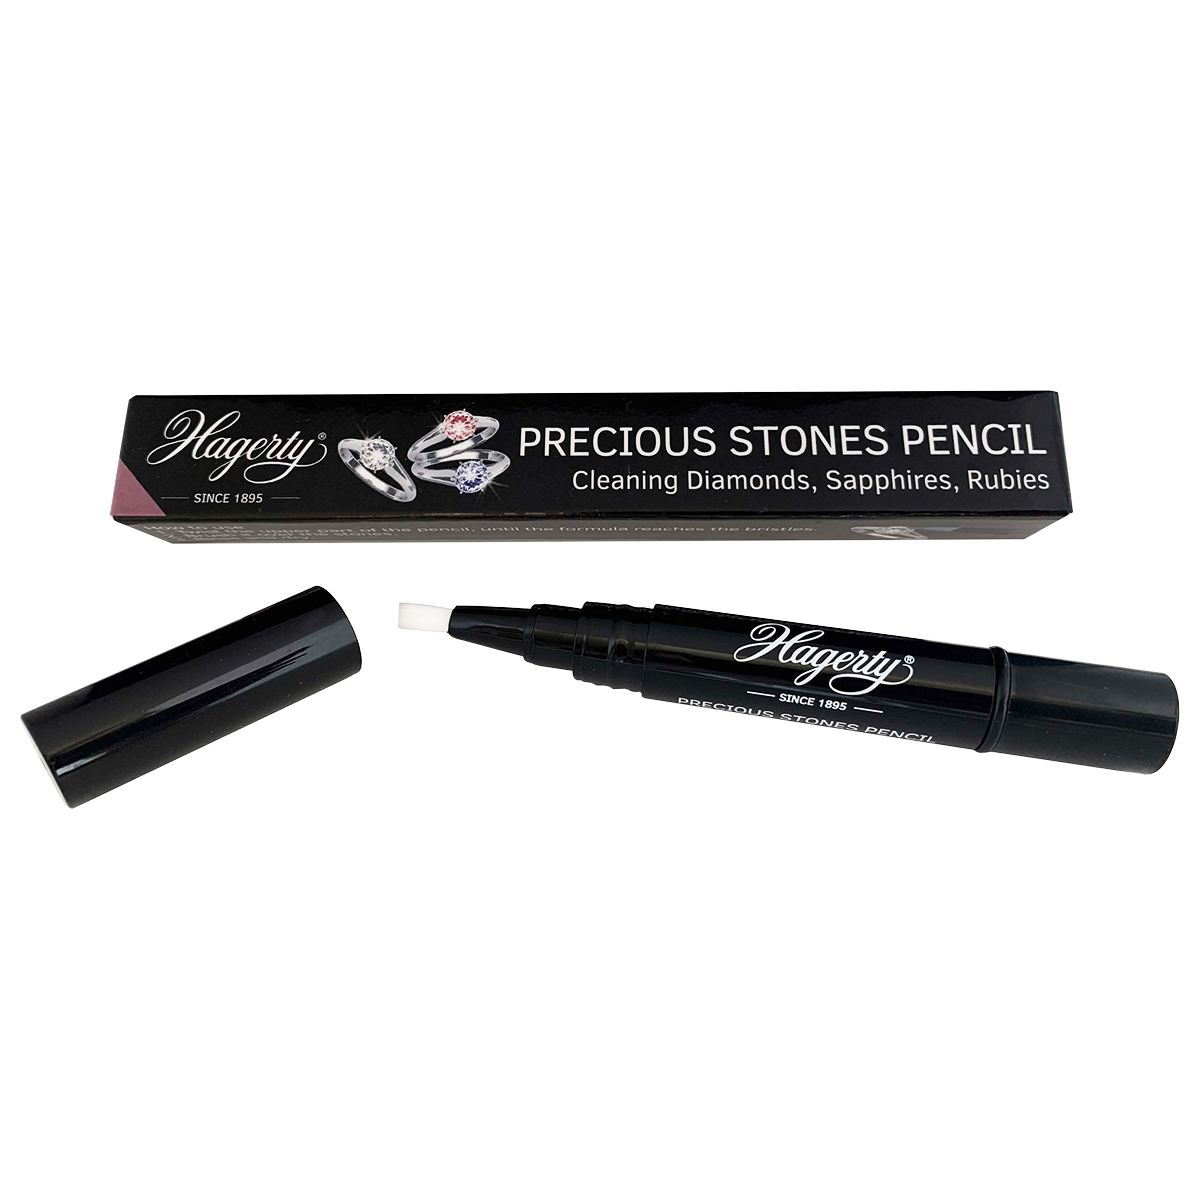 Hagerty Precious Stones Pencil, jewelry care product for jewels